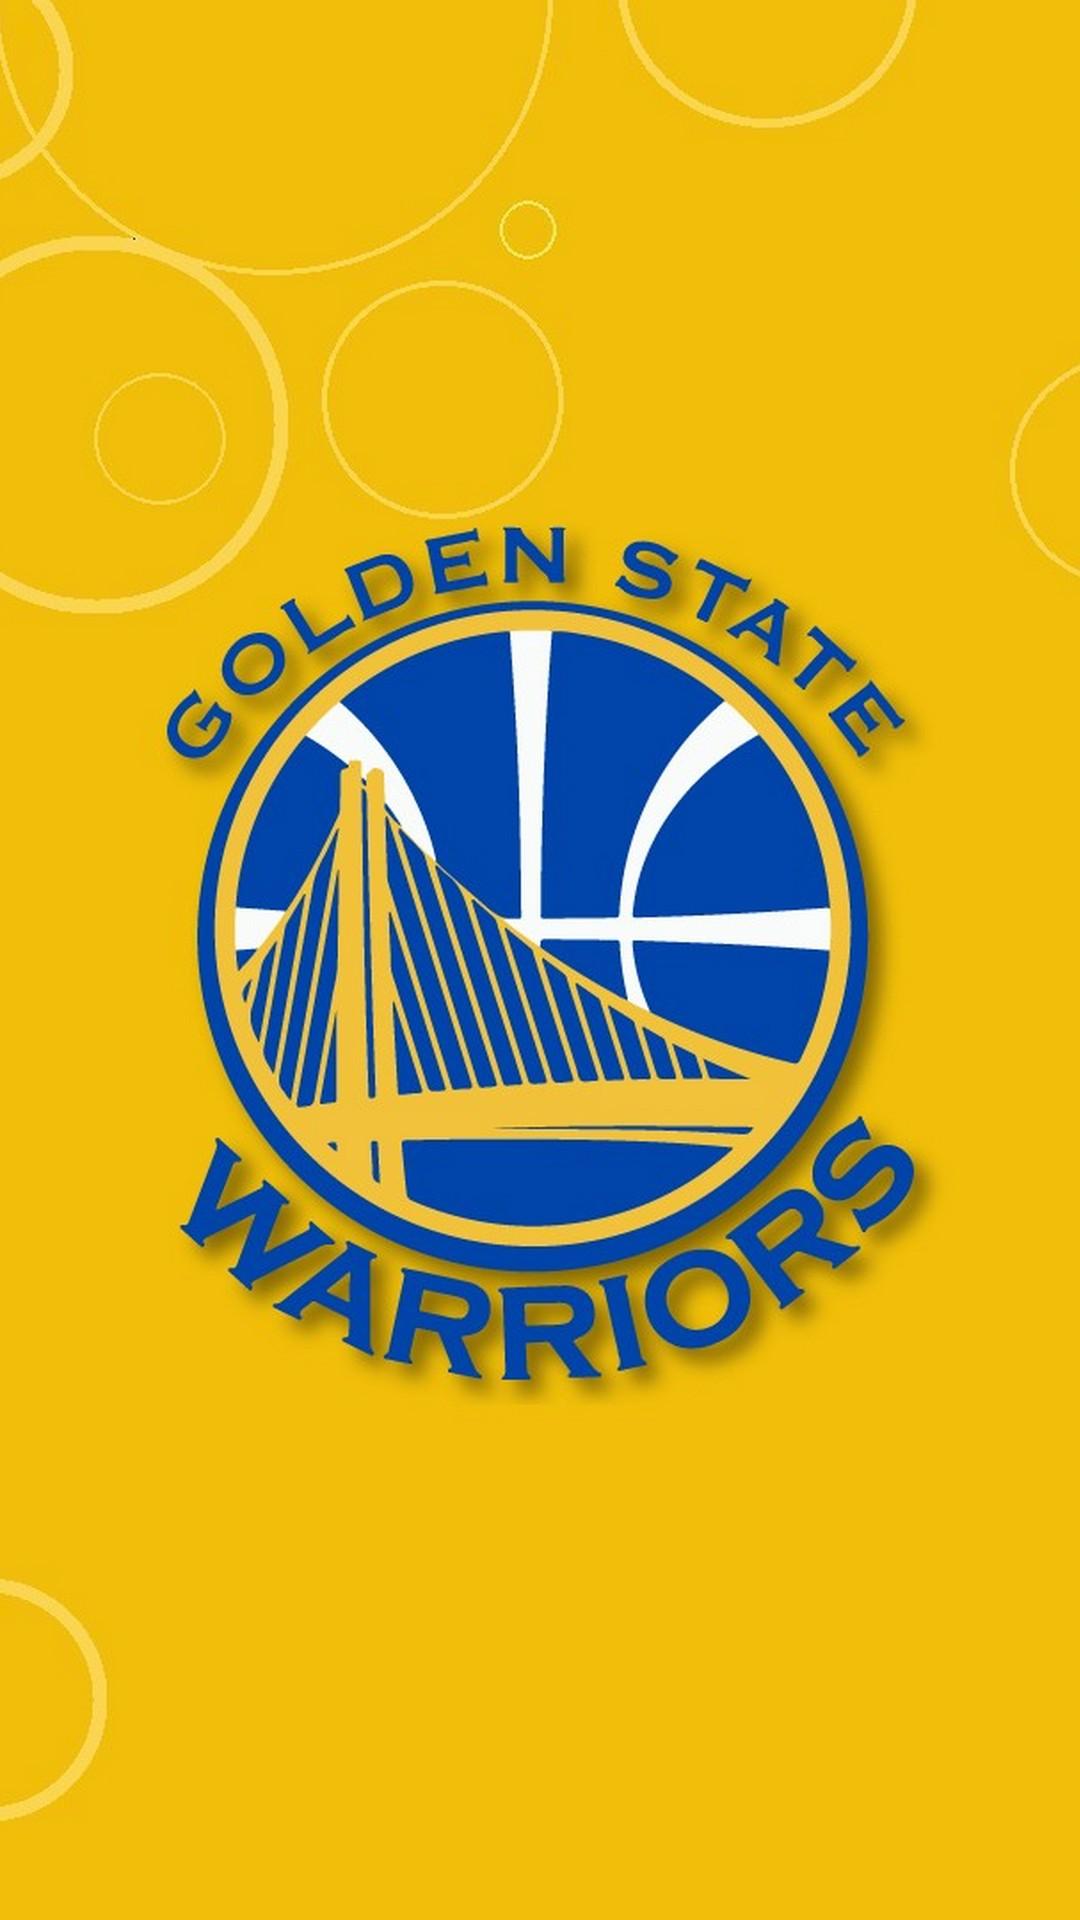 Wallpaper Android Golden State Warriors Android Wallpaper